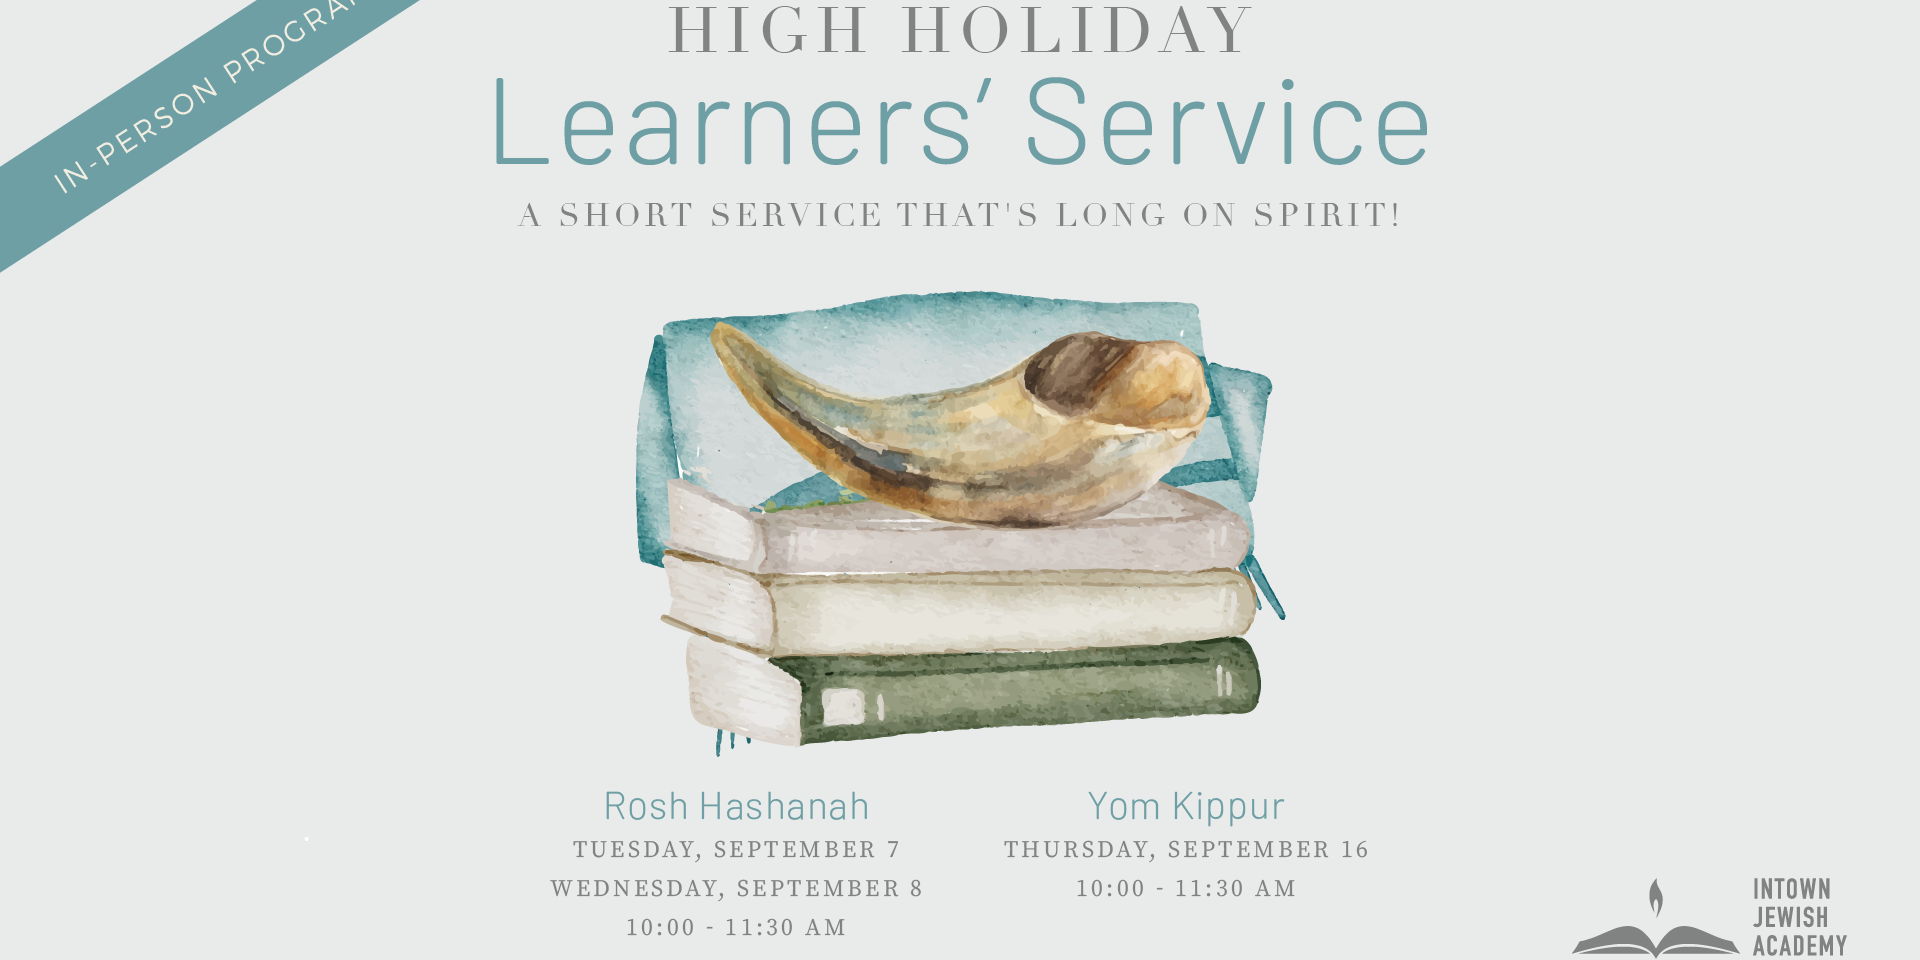 High Holiday Learners' Service promotional image